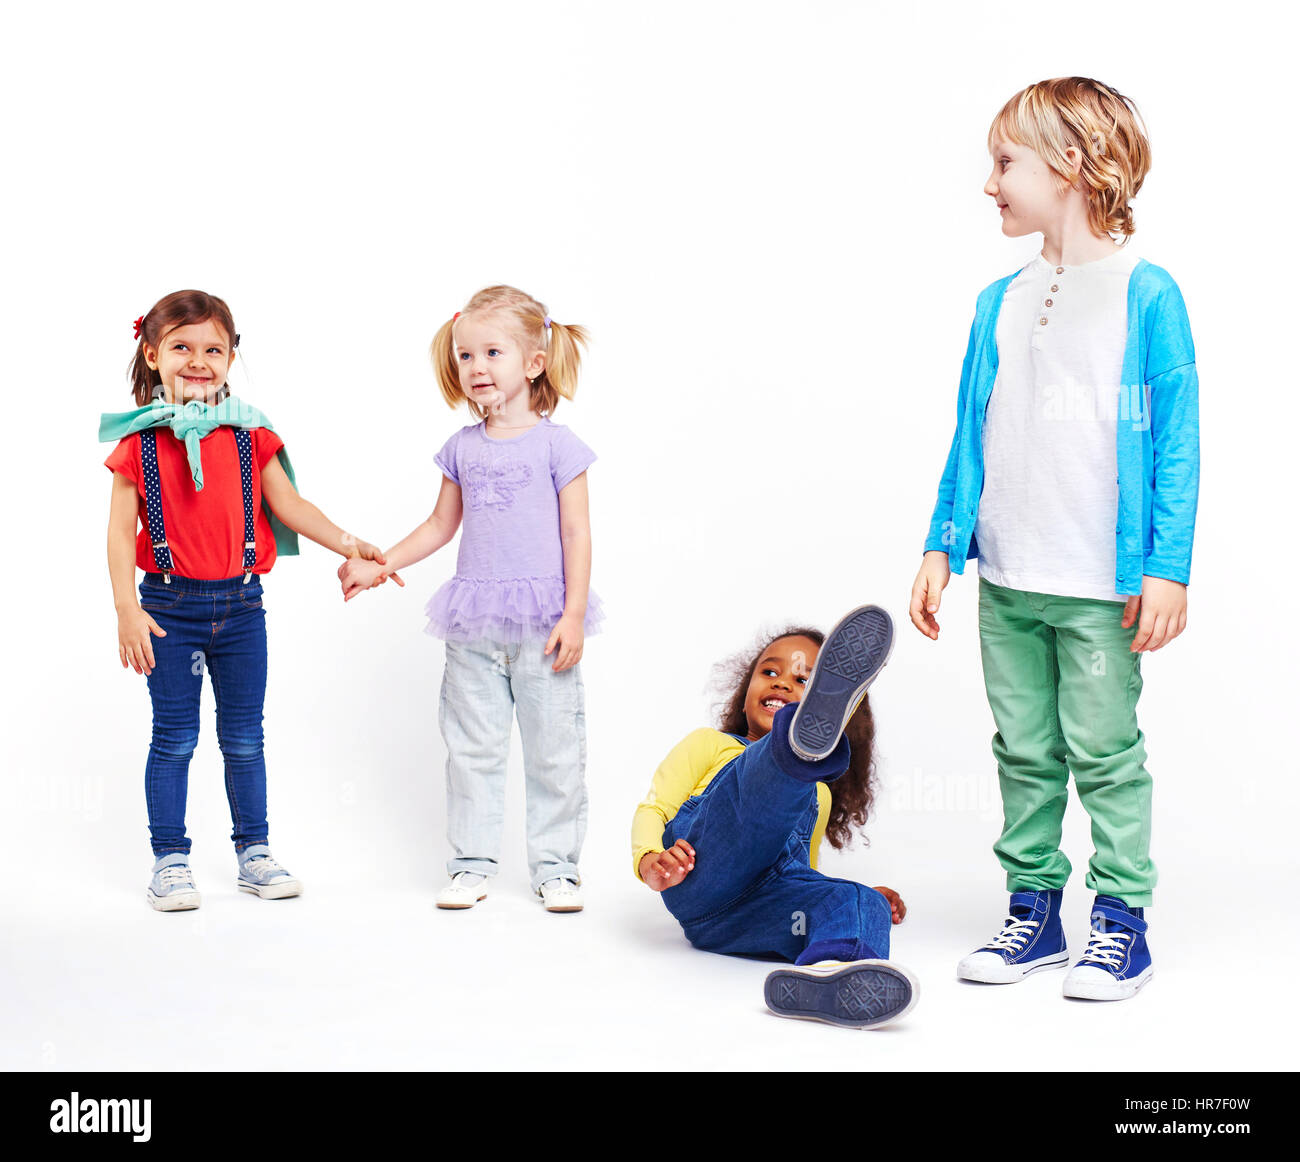 Studio portrait of children against white background: cutout of four kids in bright colorful clothes, two girls holding hands, girl falling down and b Stock Photo